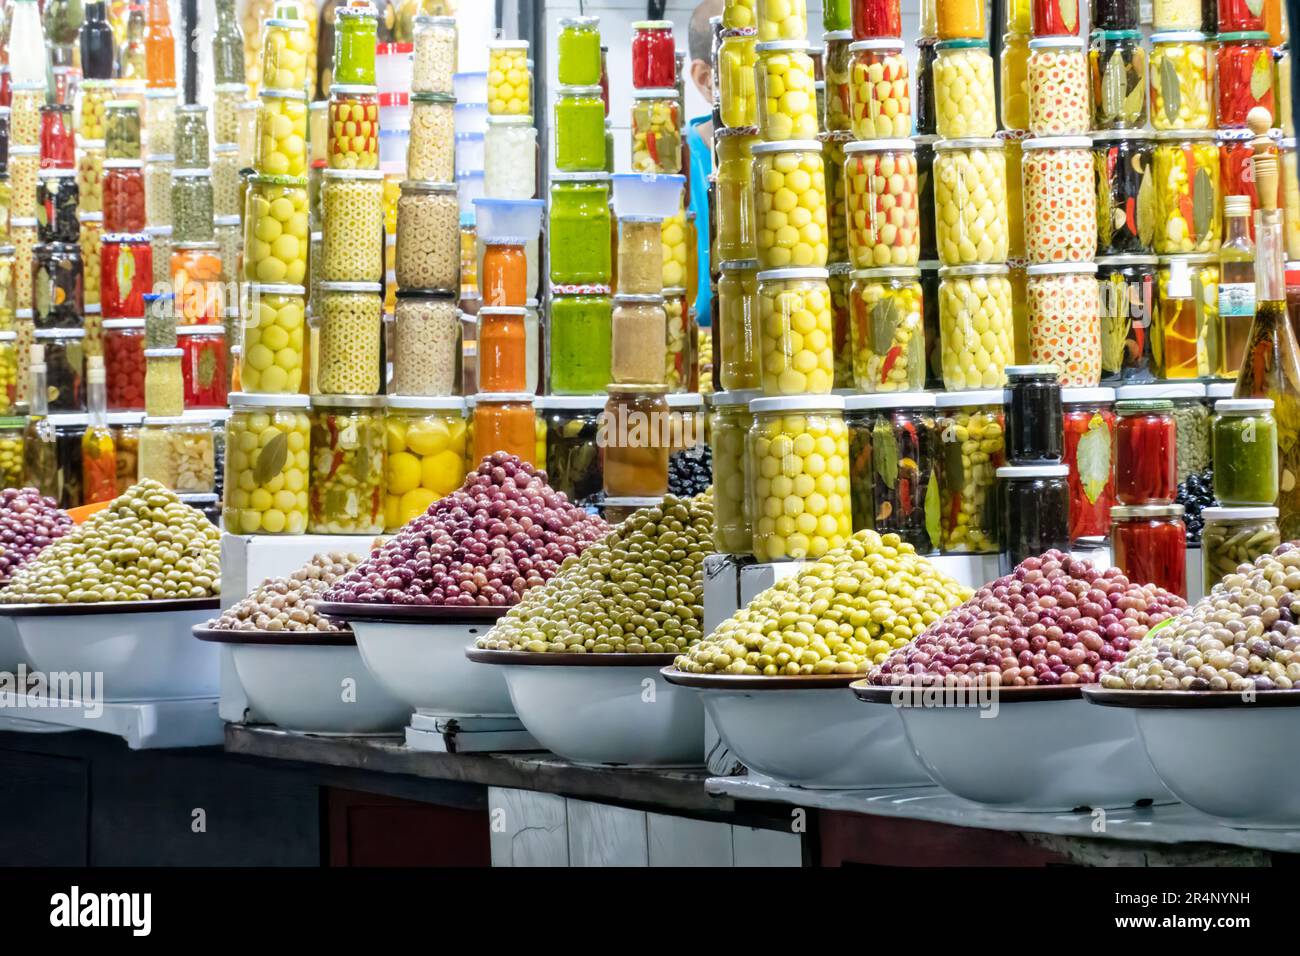 Fresh assorted olives and olives in jars for sale in souks stalls located in the central souk area, Marrakesh, Morocco. an impressive tempting display Stock Photo